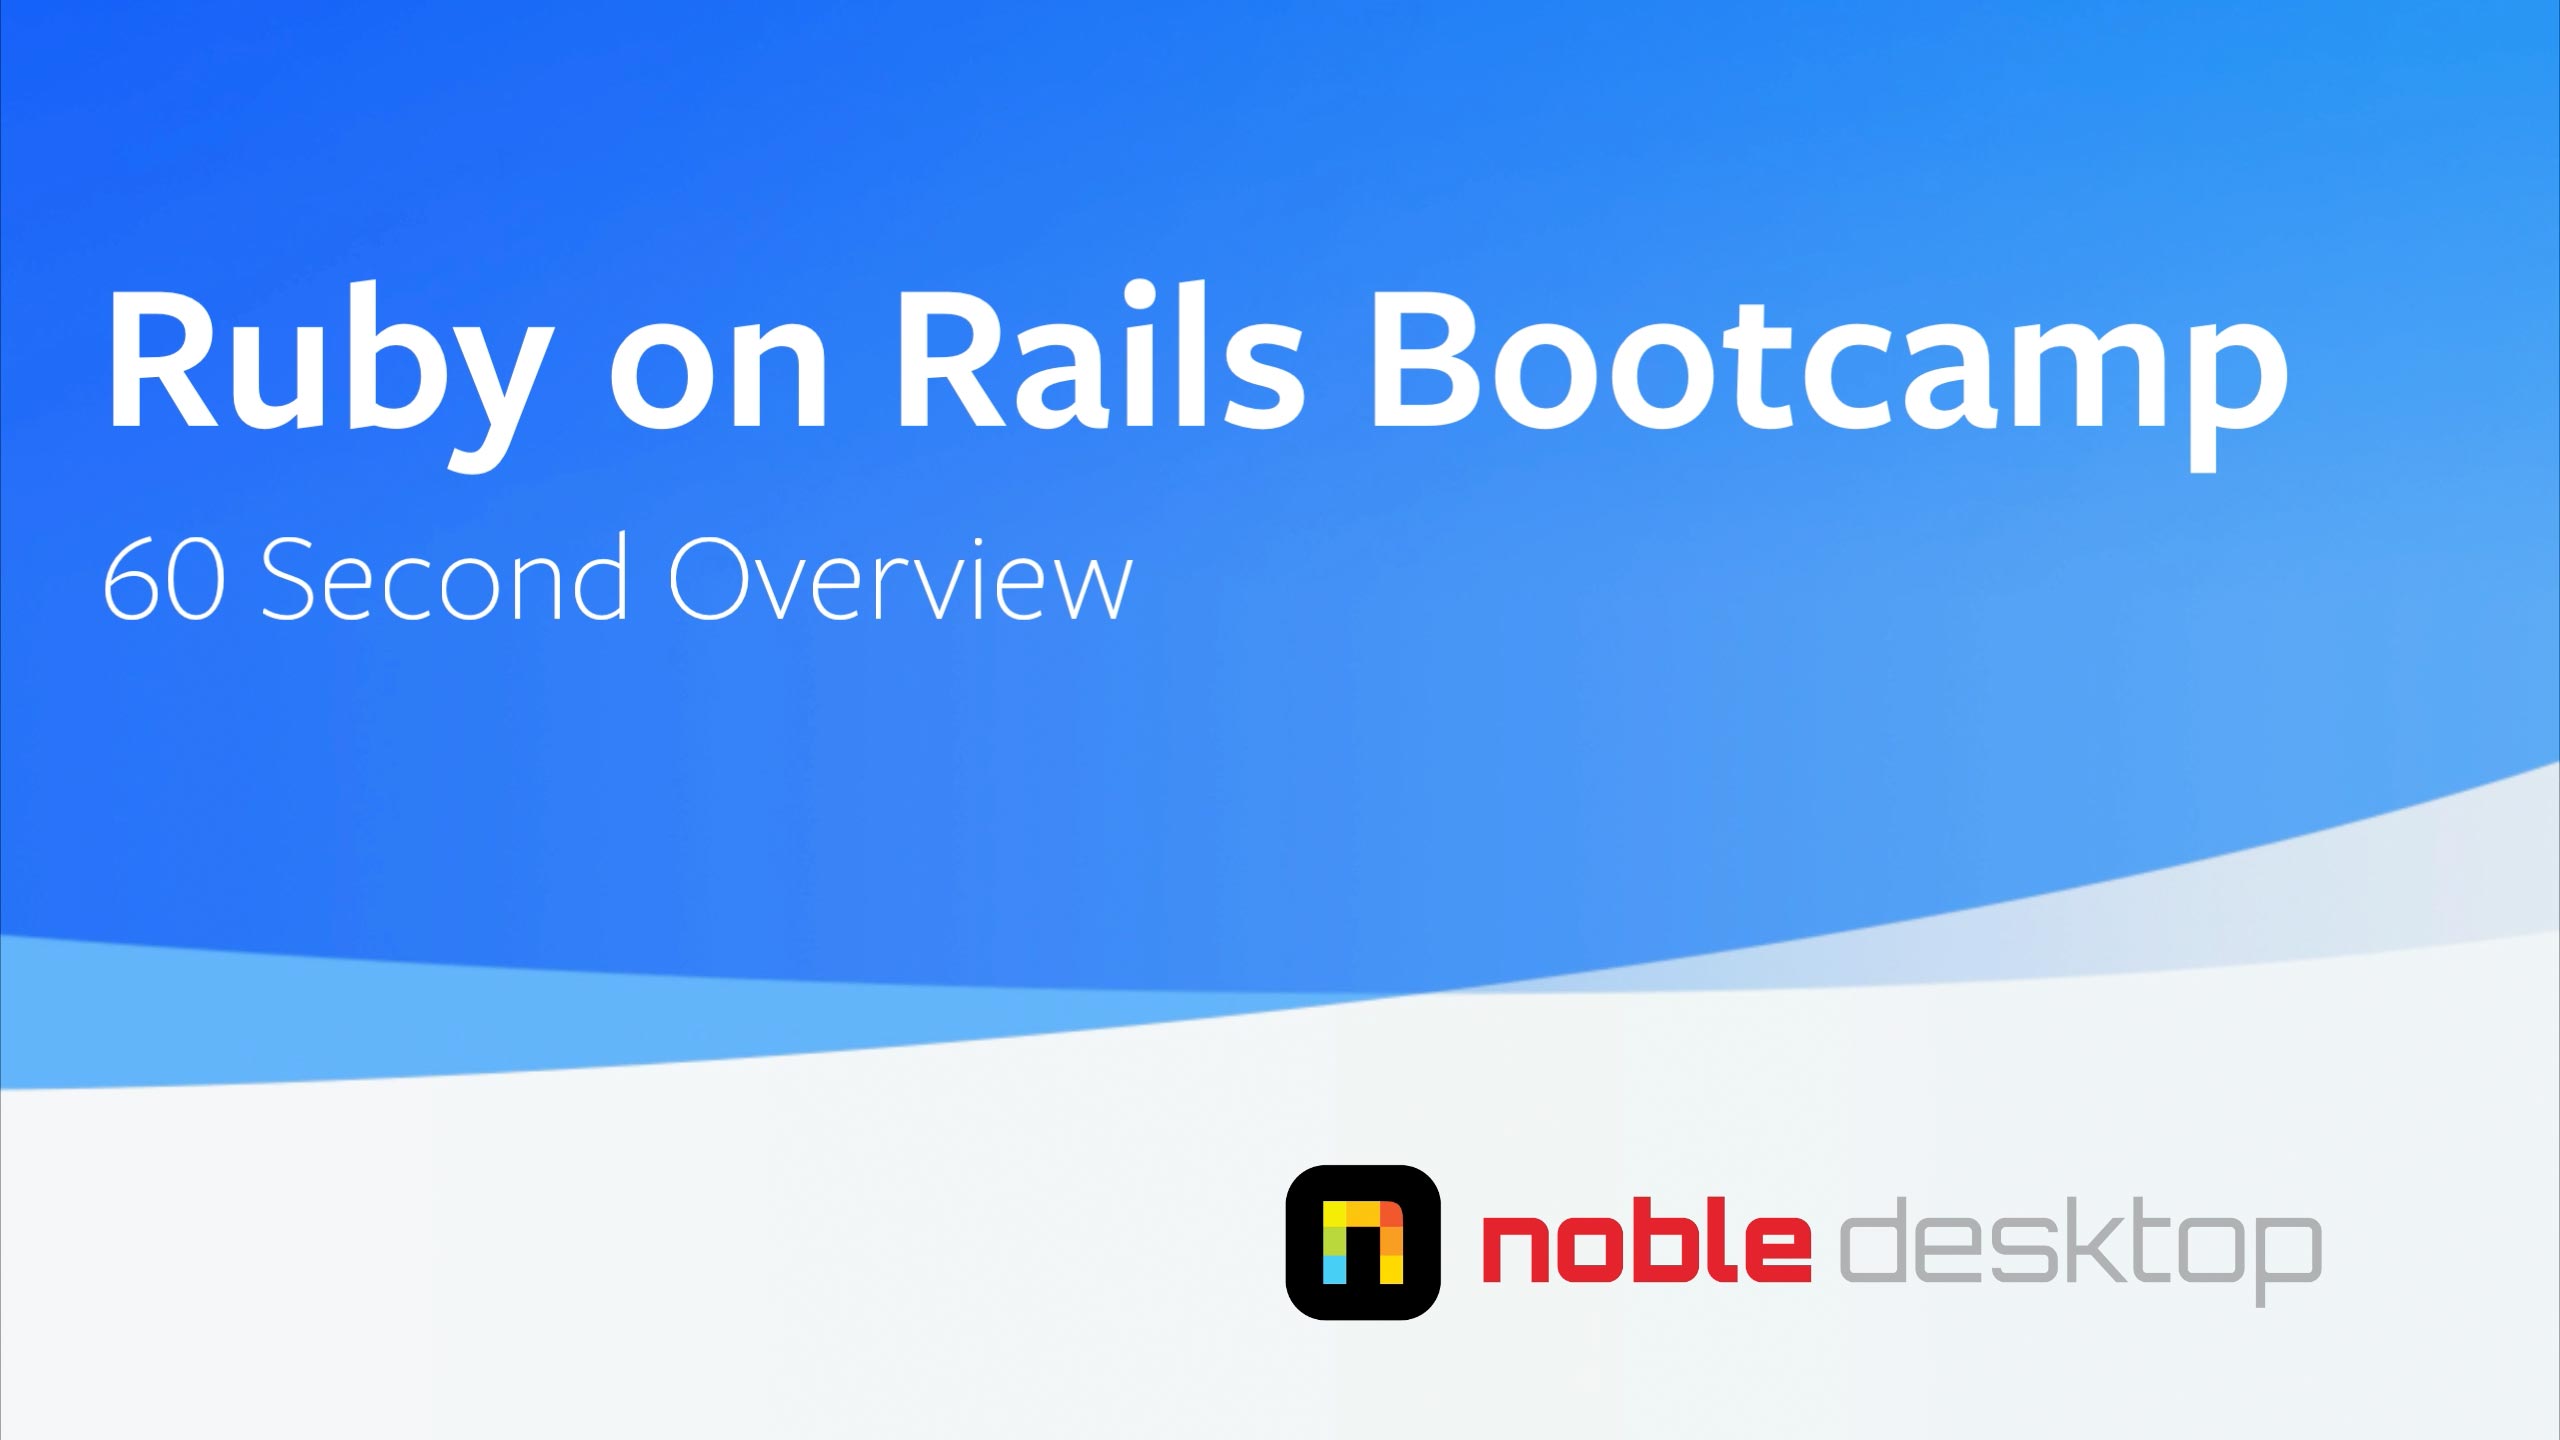 Ruby on Rails Bootcamp Class Overview